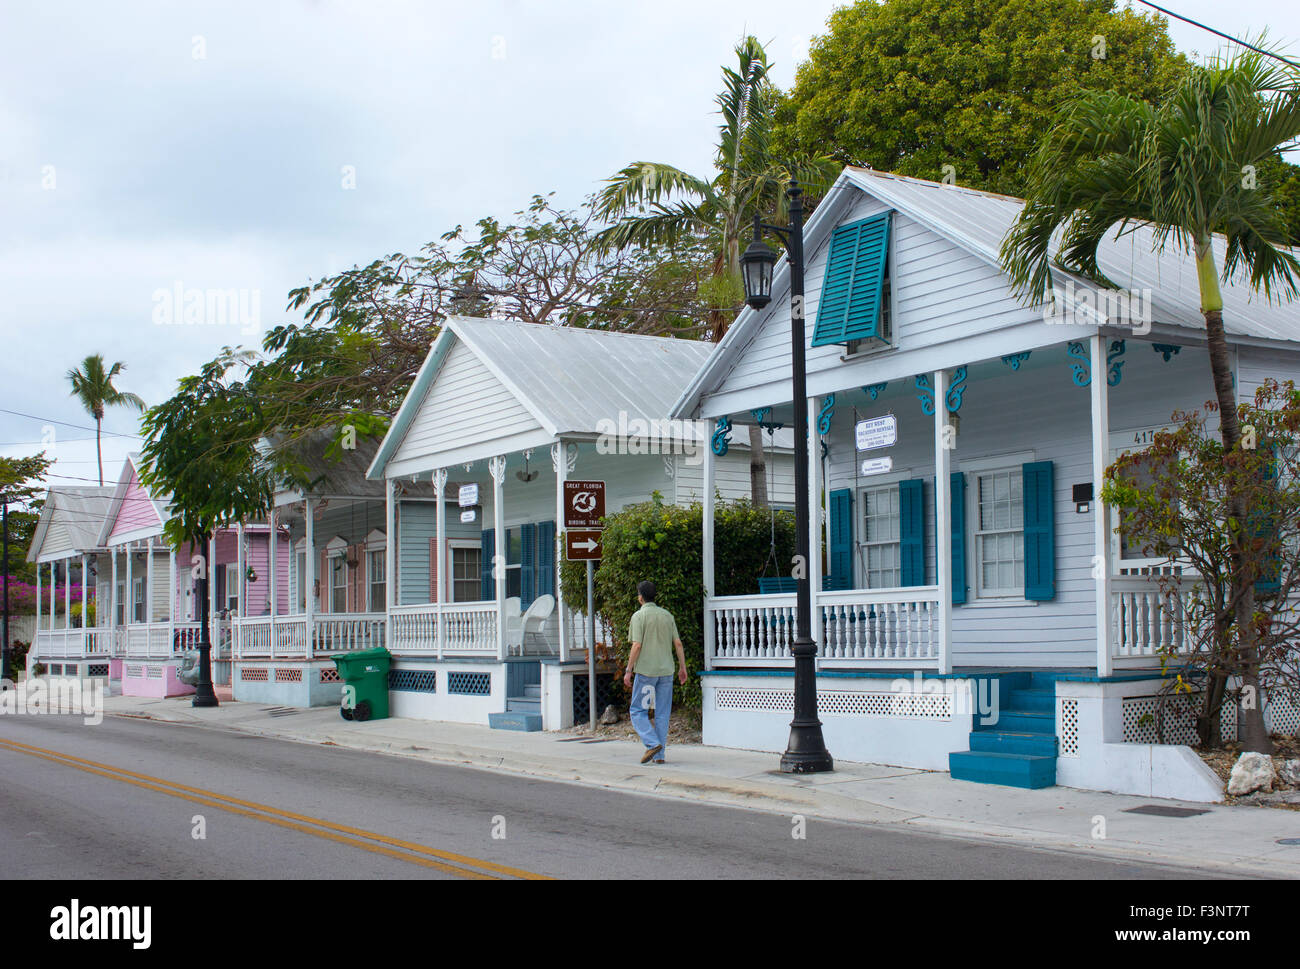 Duval St. in Key West, Florida, USA. Stock Photo